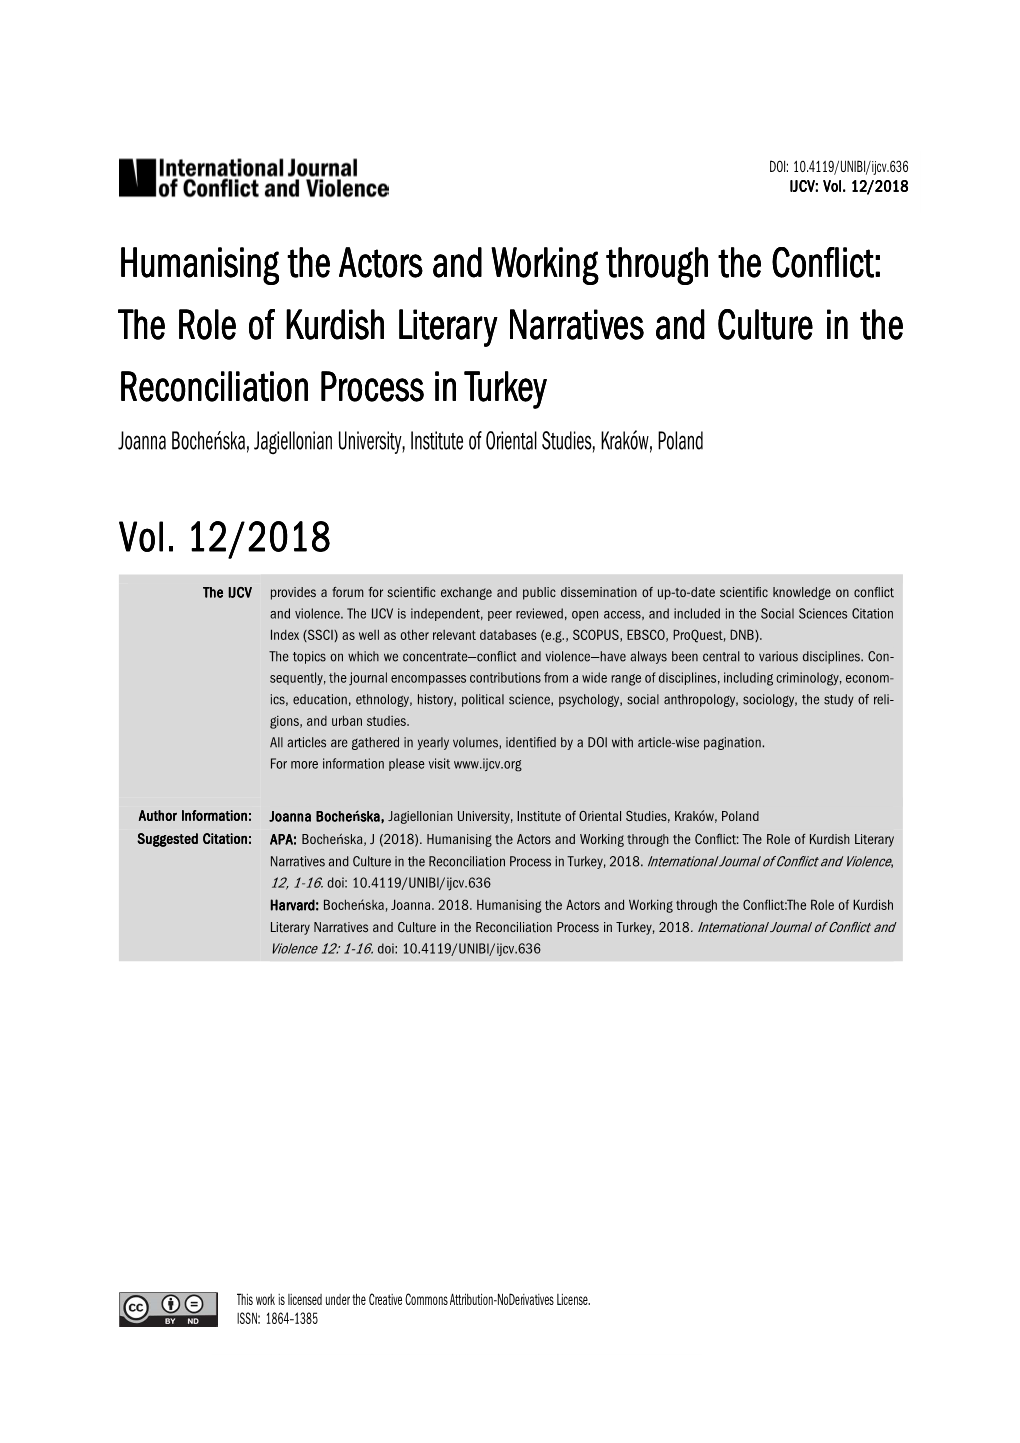 Humanising the Actors and Working Through the Conflict: the Role of Kurd